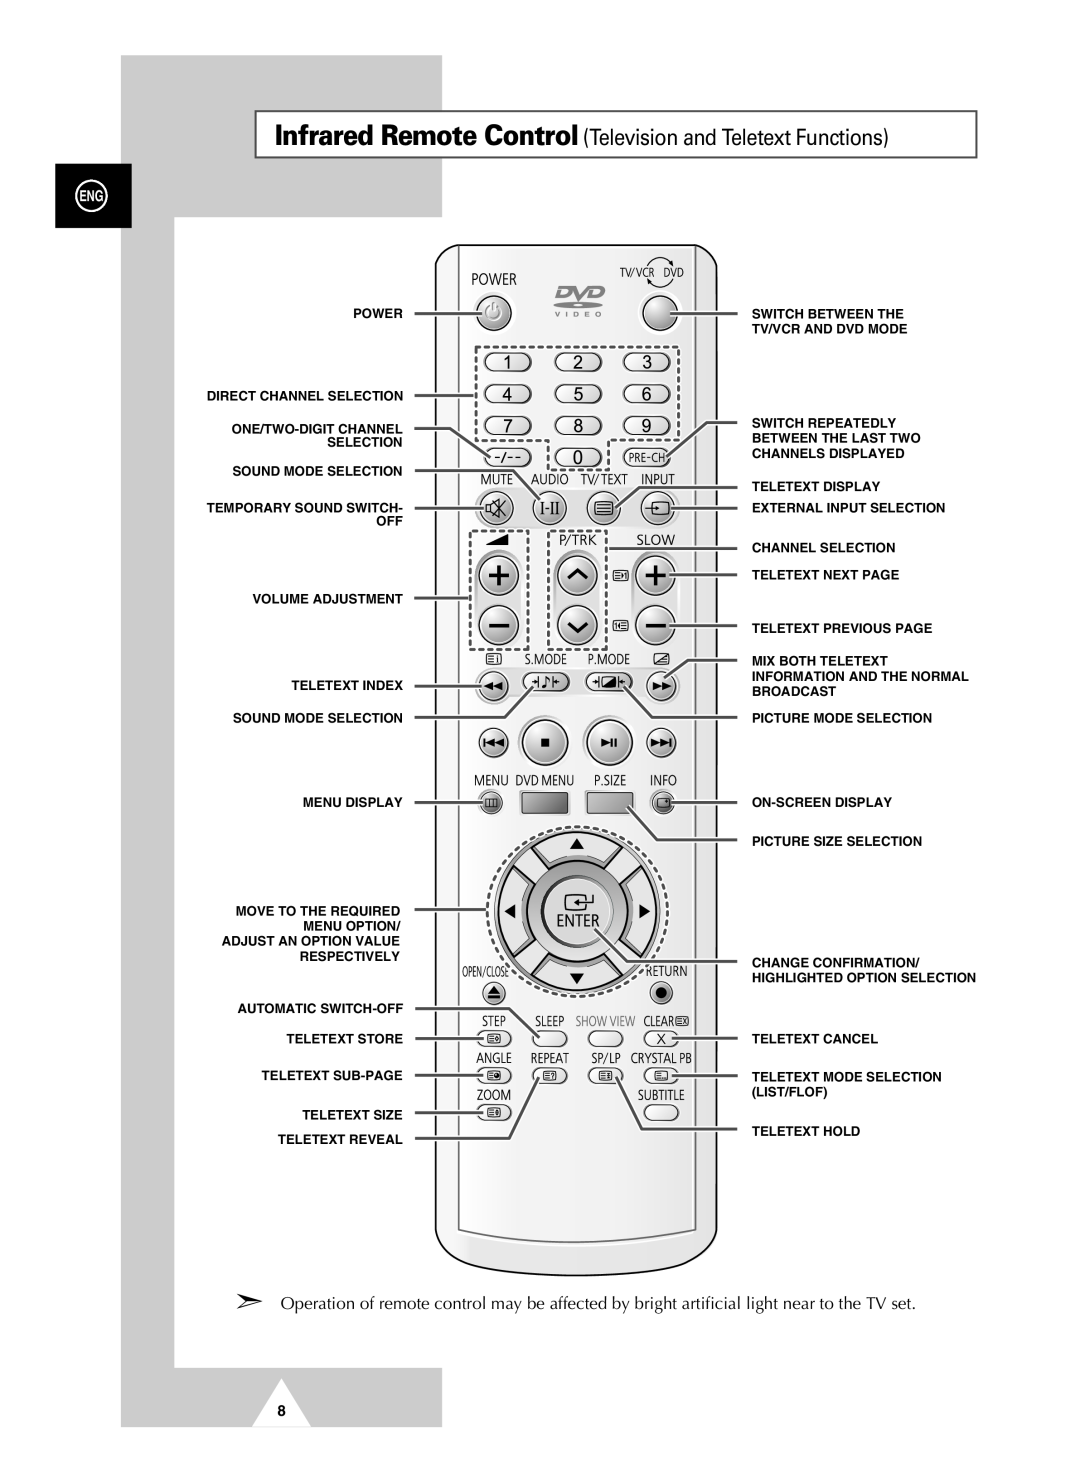 Samsung UW21J10VD5XXEC, UW28J10VD5XXEG, UW21J10VD5XXEG manual Infrared Remote Control Television and Teletext Functions 